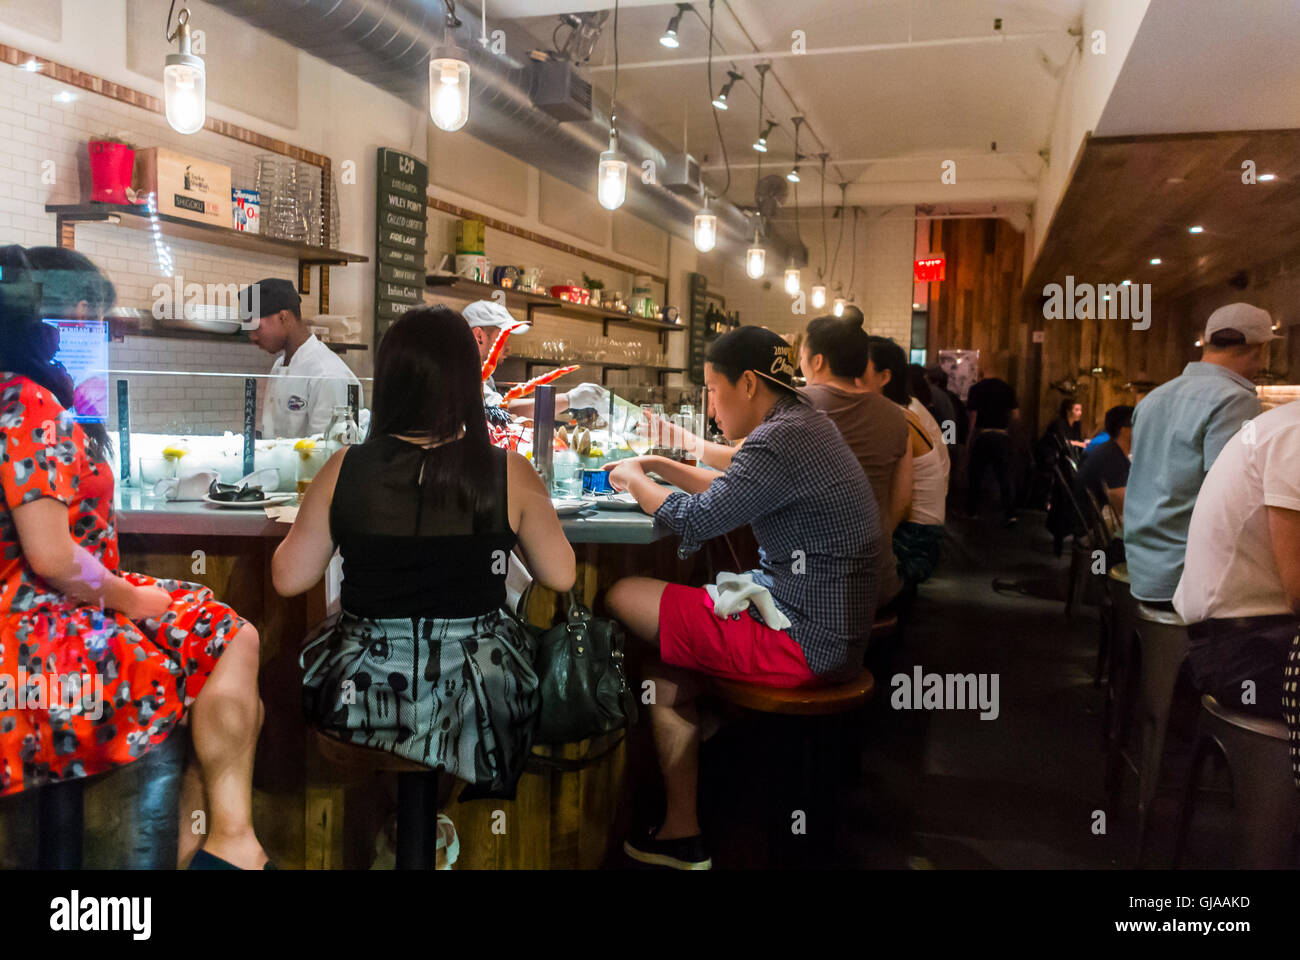 New York City, NY, USA, Large People Chinese Tourists, Sharing Seafood Meals in Restaurant CHelsea Market, man city women sitting counter Stock Photo